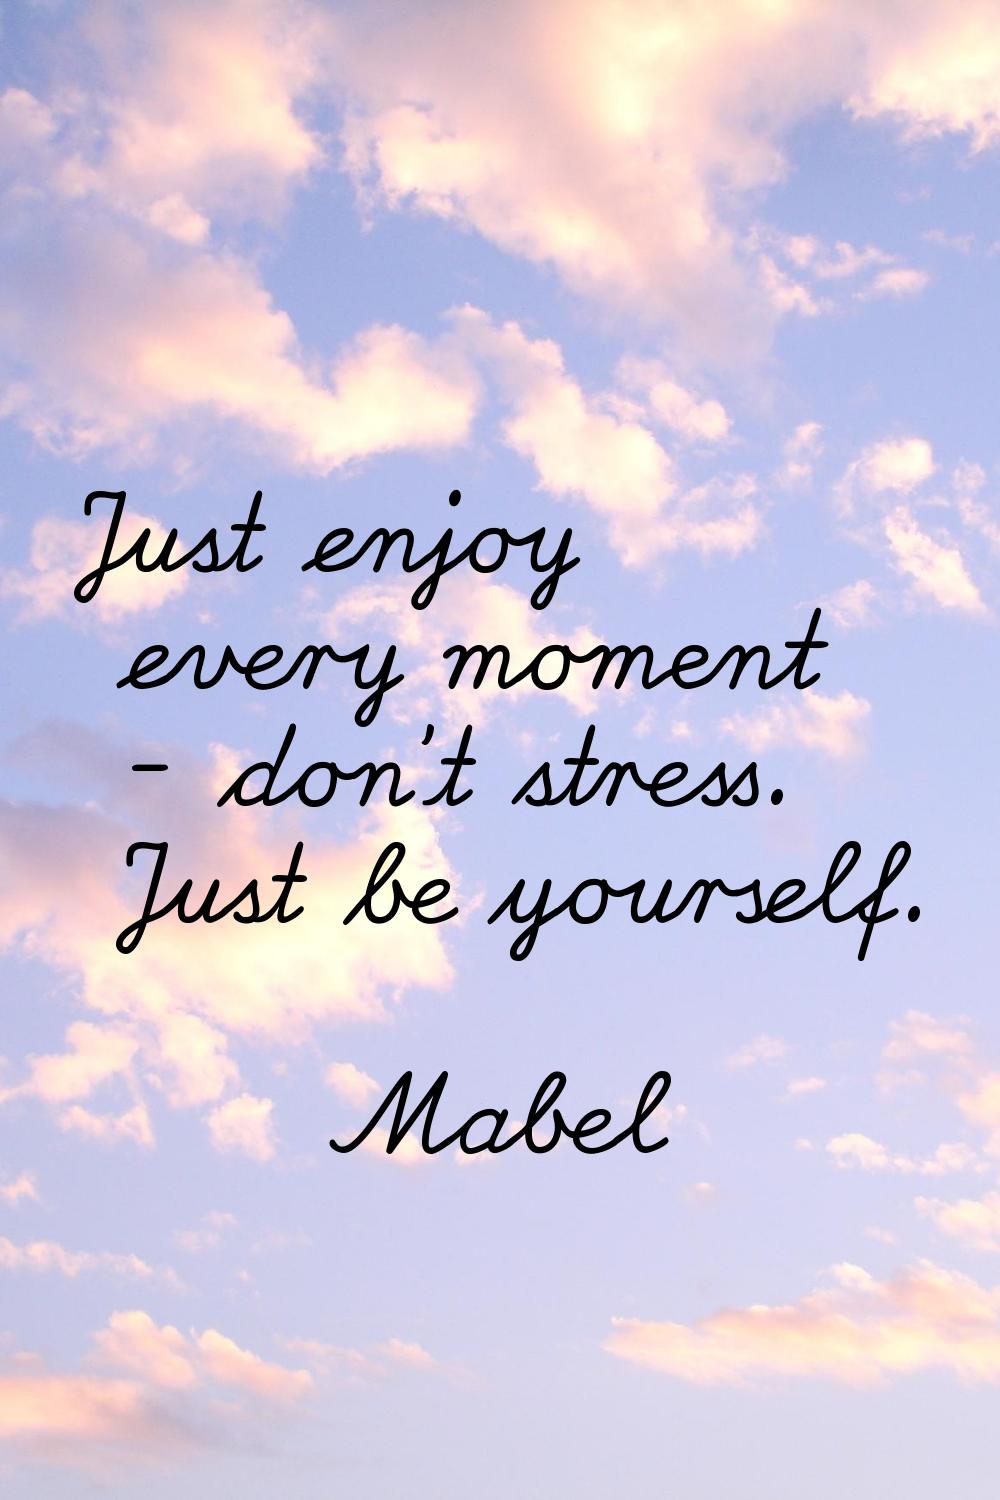 Just enjoy every moment - don't stress. Just be yourself.